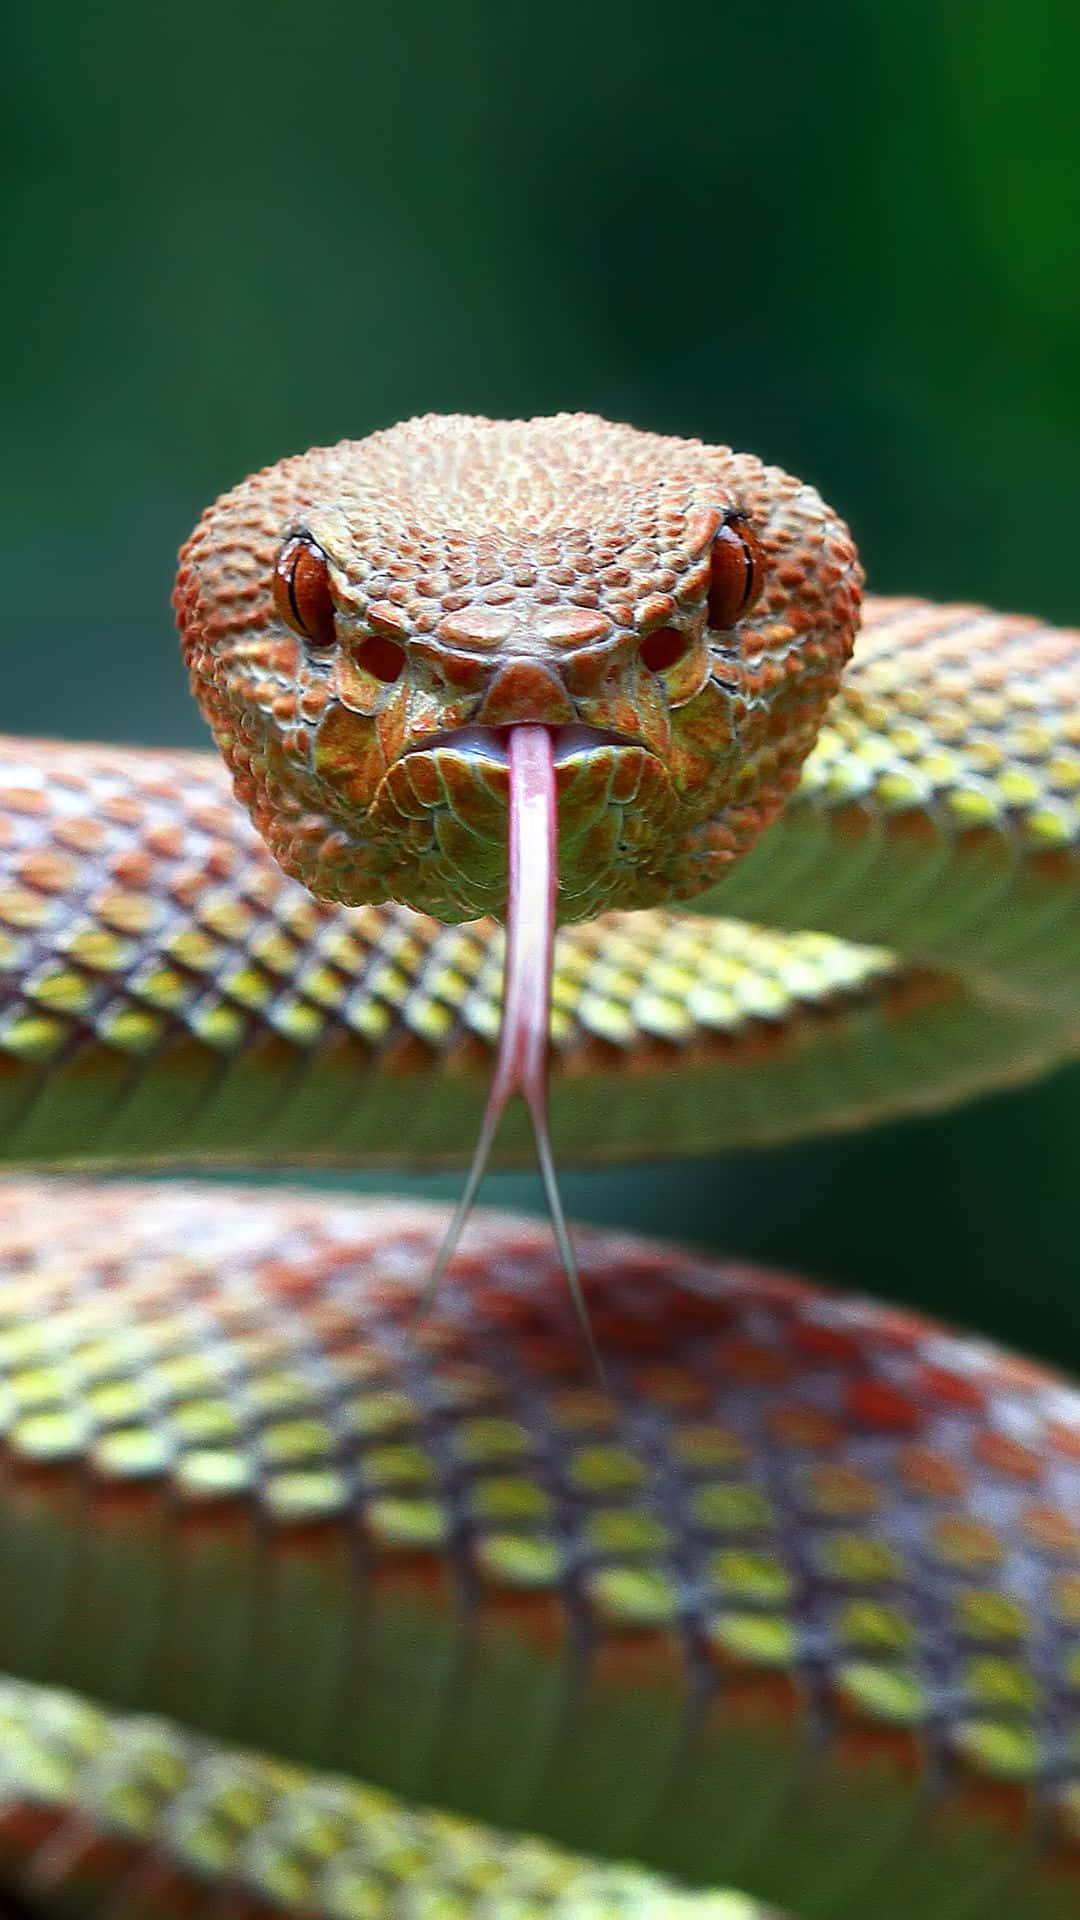 Cool Snake With Venomous Forked Tongue